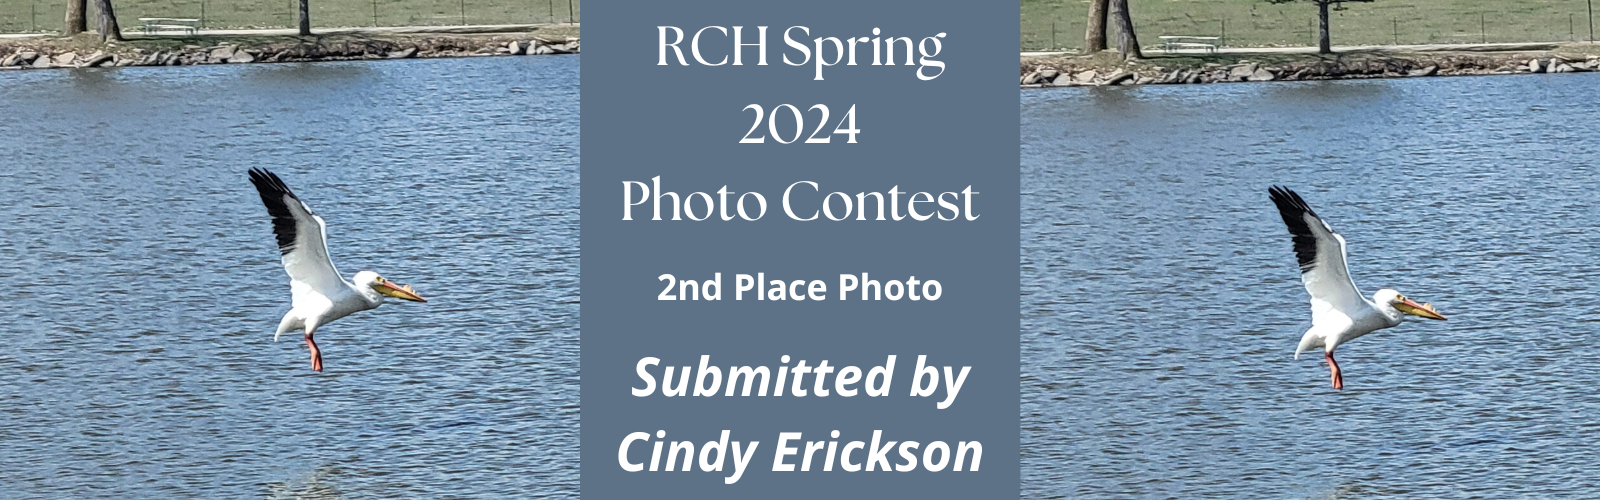 Spring Photo Contest 2nd place